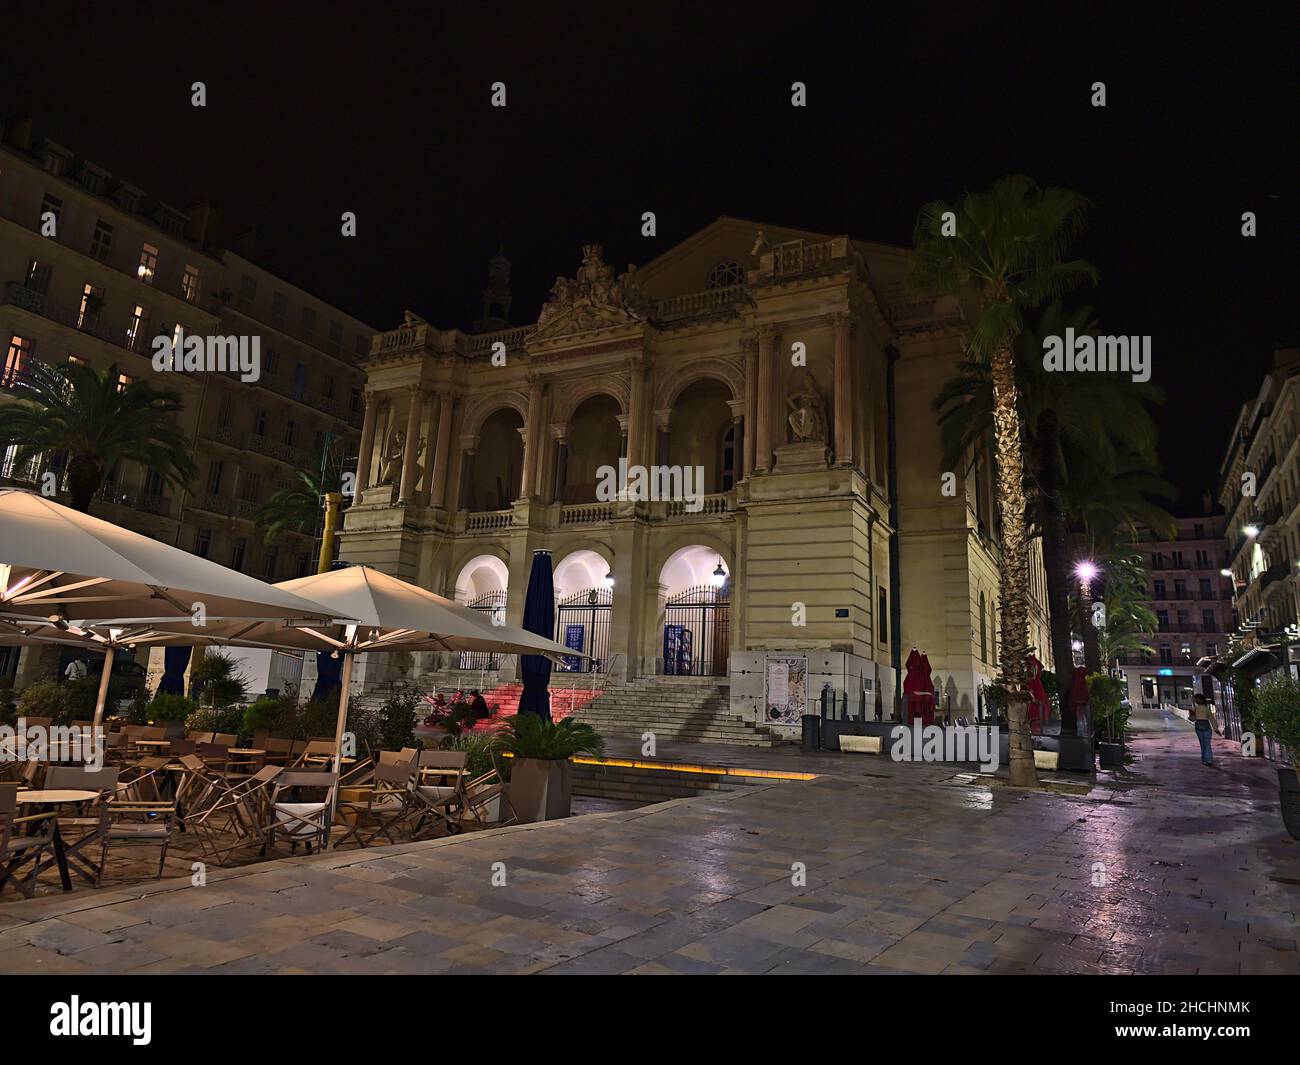 Night view of illuminated Toulon Opera building at the French Riviera with cafe seating in front on Place Victor Hugo in historic center. Stock Photo